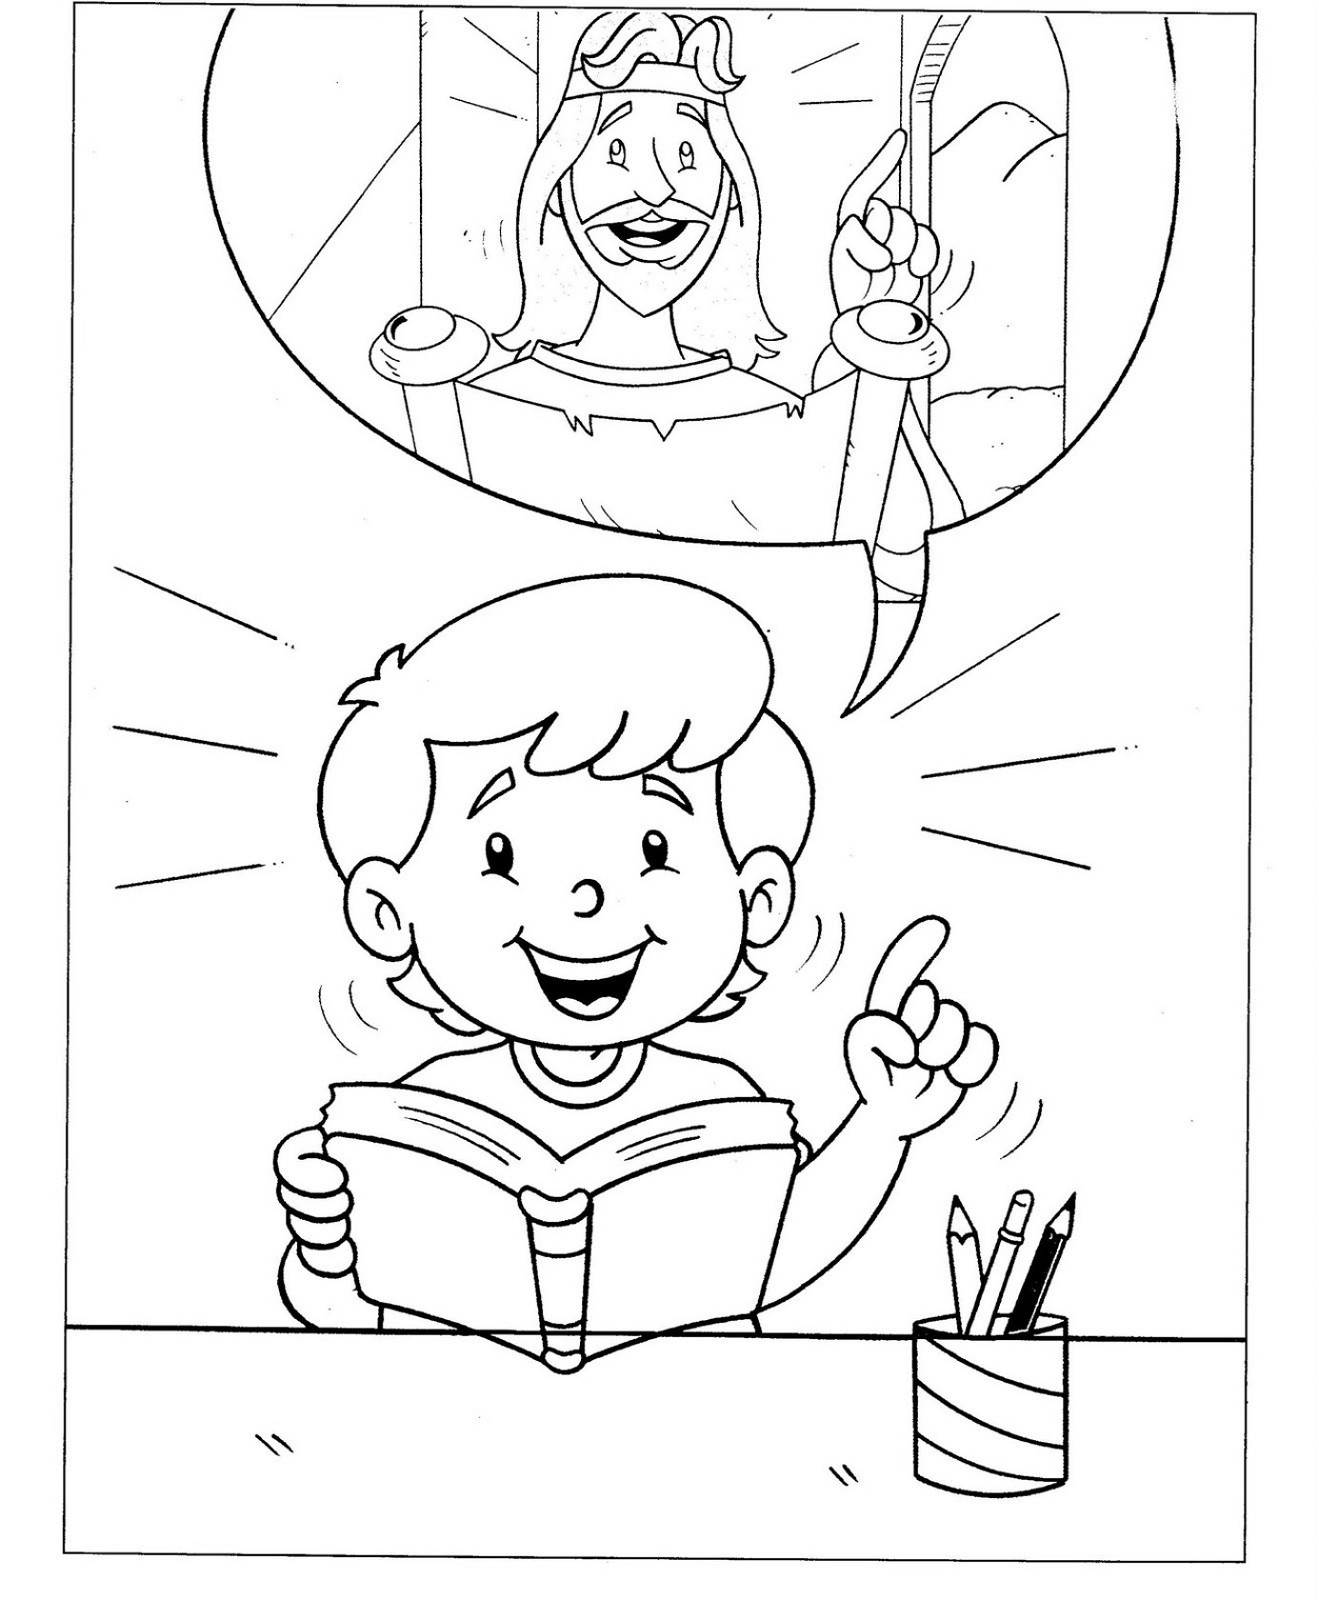 Coloring Pages For Kids Christian
 Christian Coloring Pages for Kids and Adults